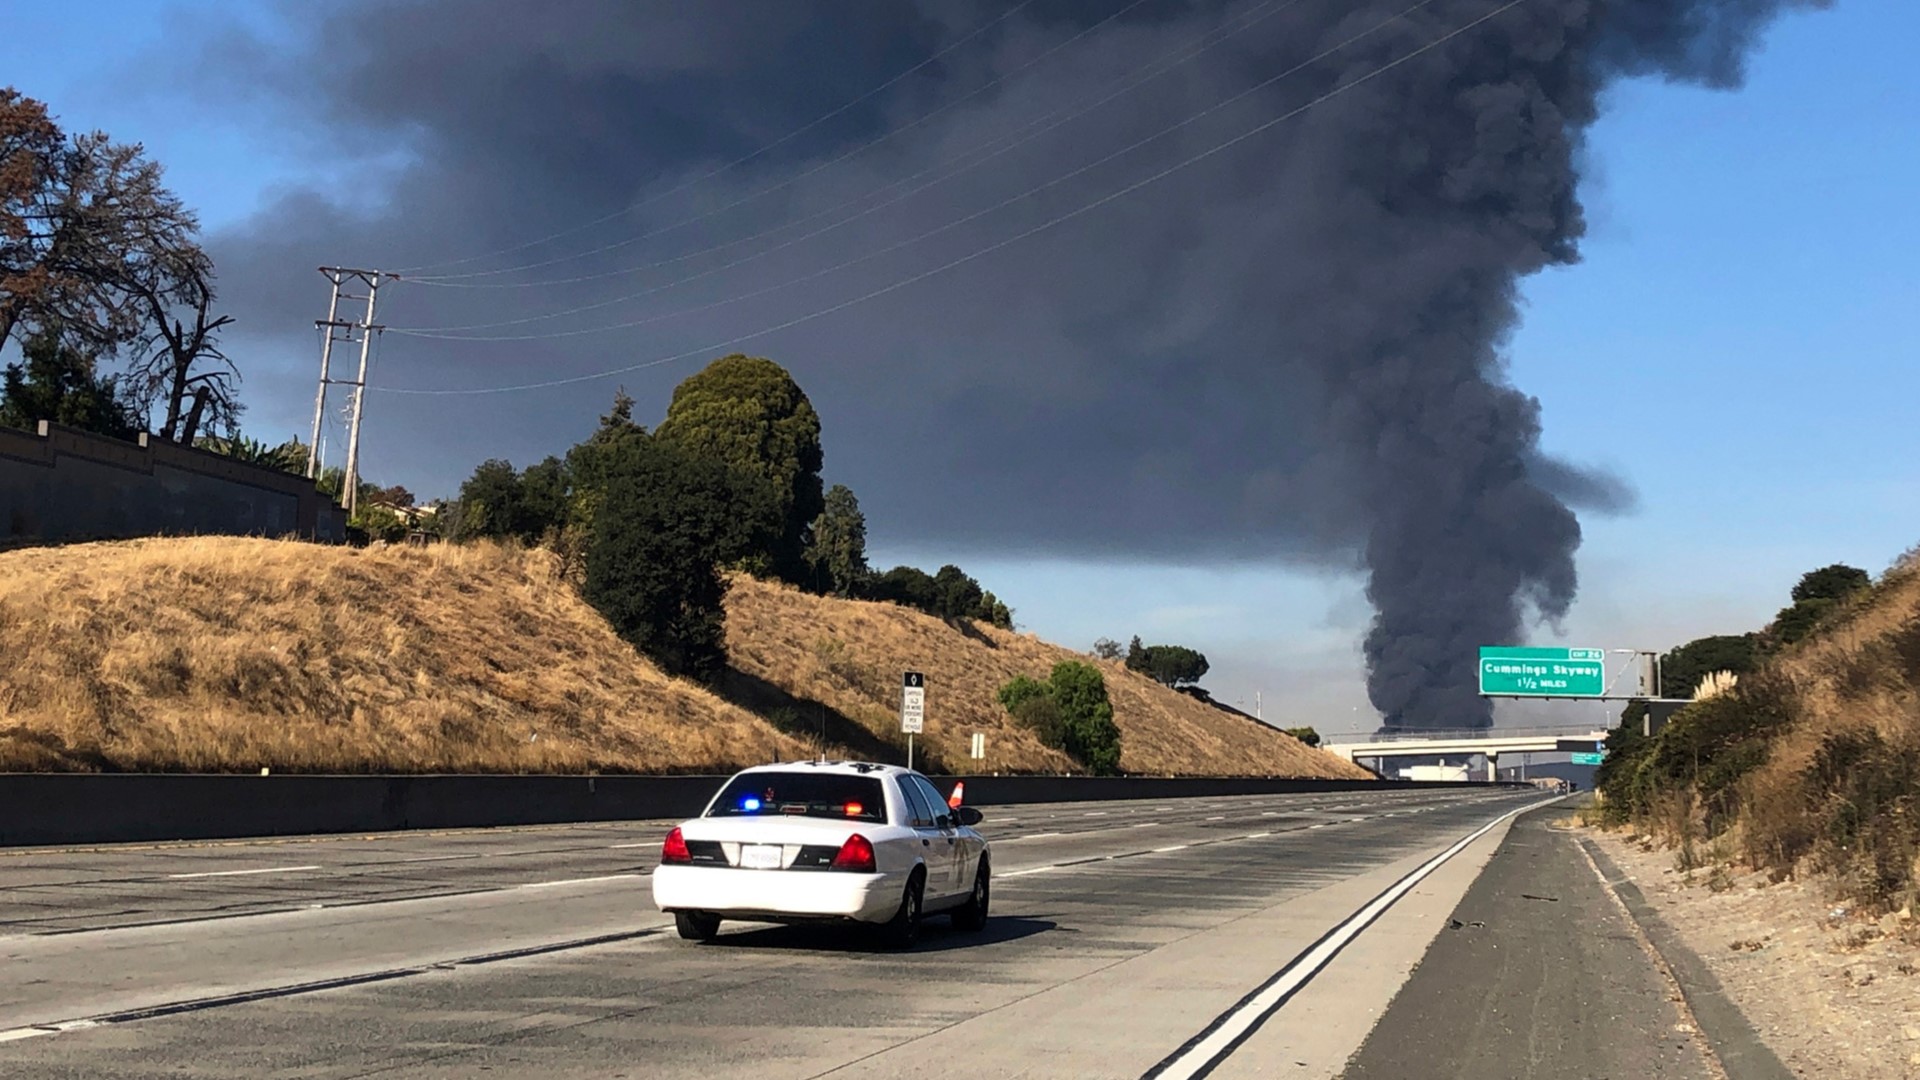 Bay Area firefighters contained an oil facility fire in the East Bay, located at the NuStar energy facility. It temporarily shutdown a portion of I-80.